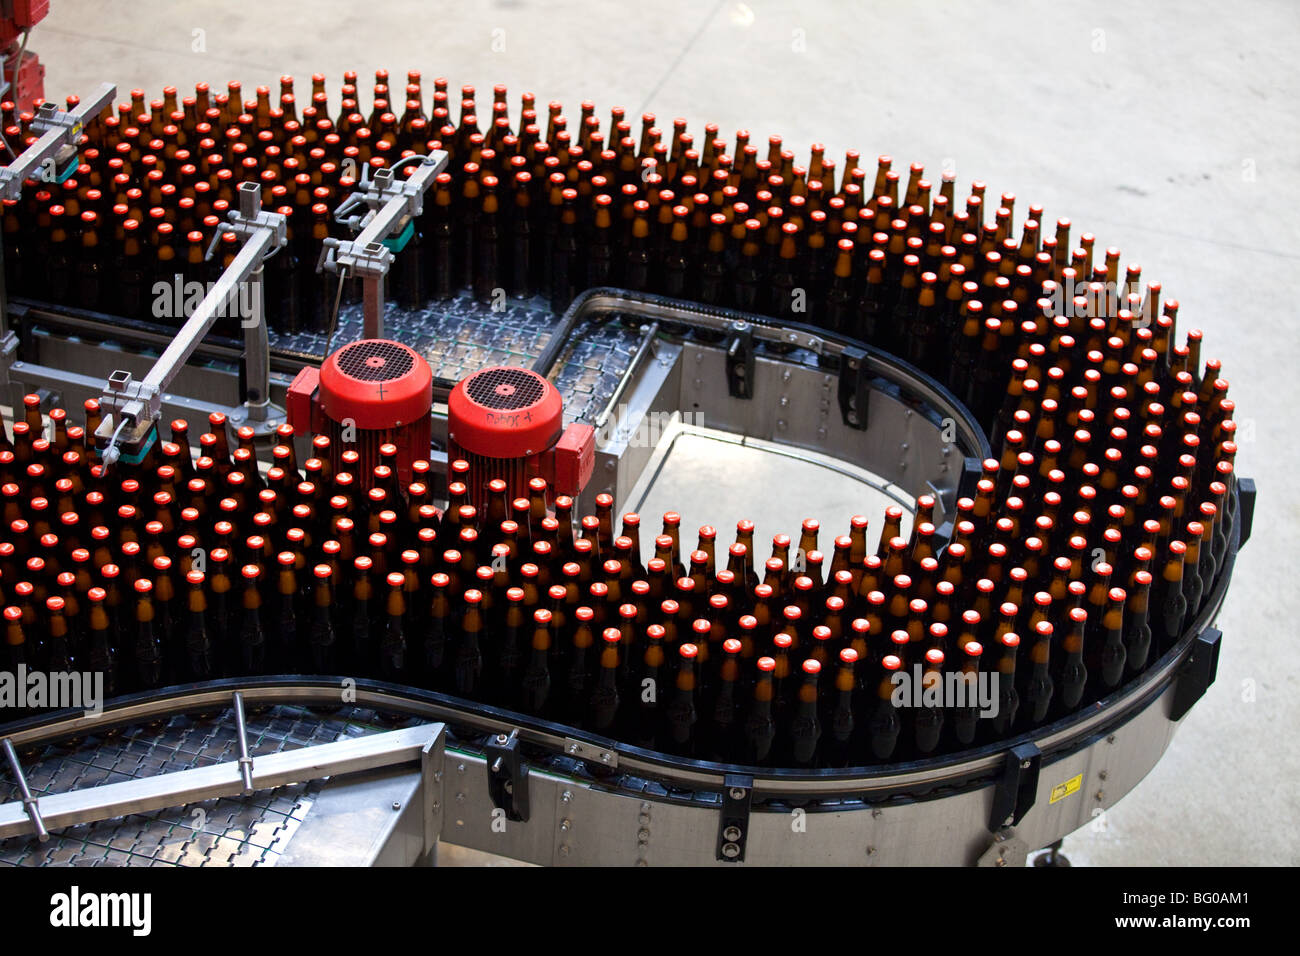 Filled bottles on conveyor belt in a brewery, Poland. Stock Photo